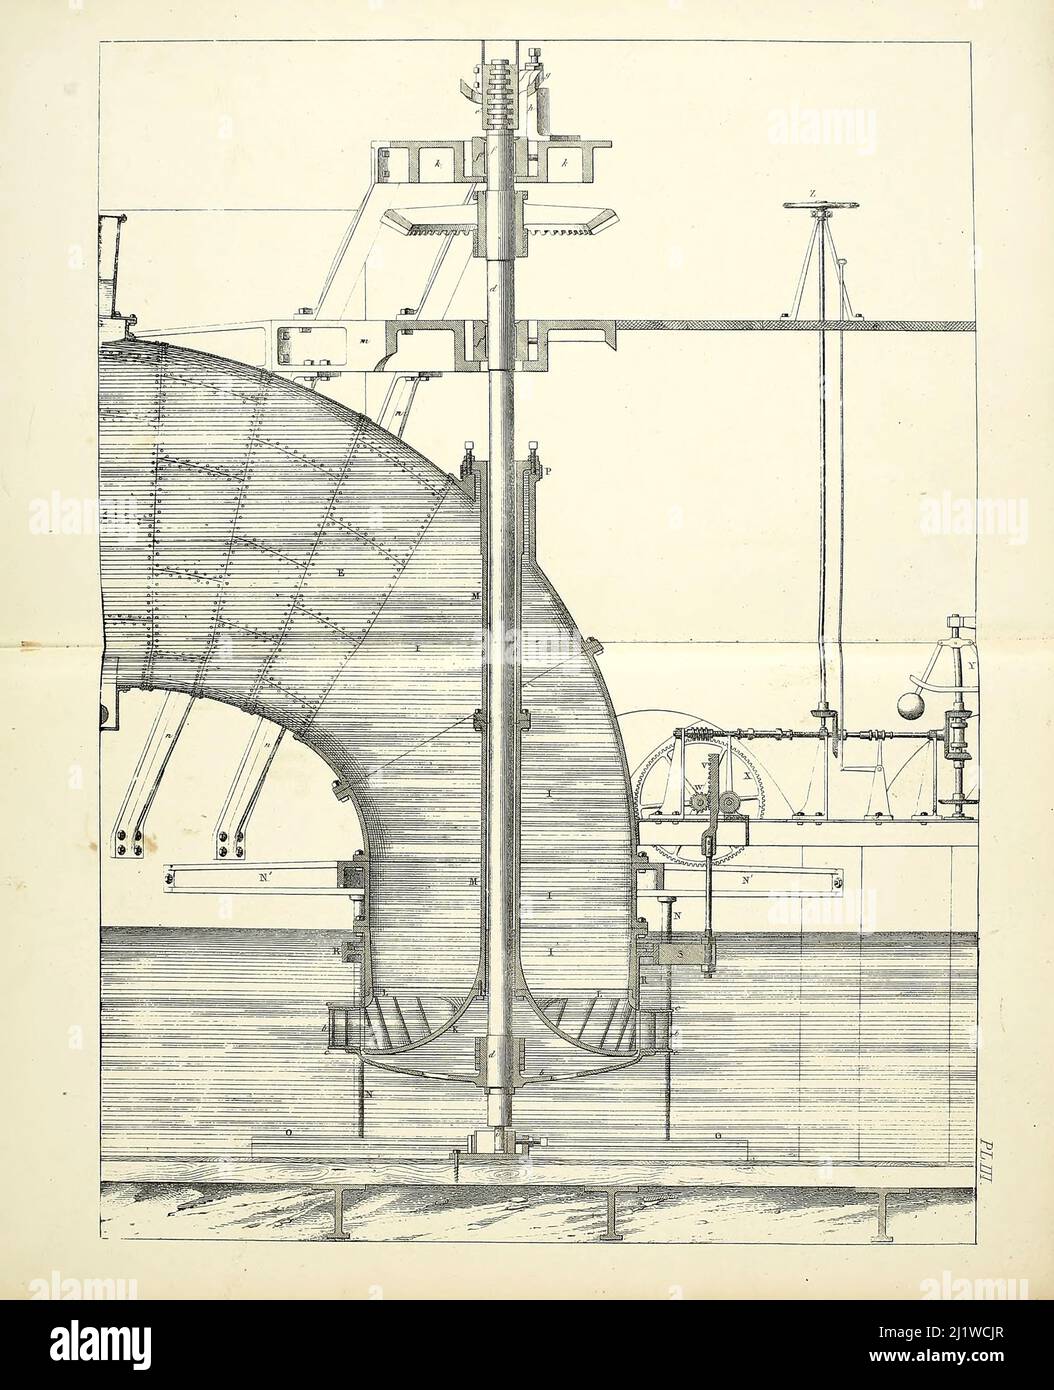 Water Wheel from Appleton's dictionary of machines, mechanics, engine-work, and engineering : illustrated with four thousand engravings on wood ; in two volumes by D. Appleton and Company Published New York : D. Appleton and Co 1873 Stock Photo